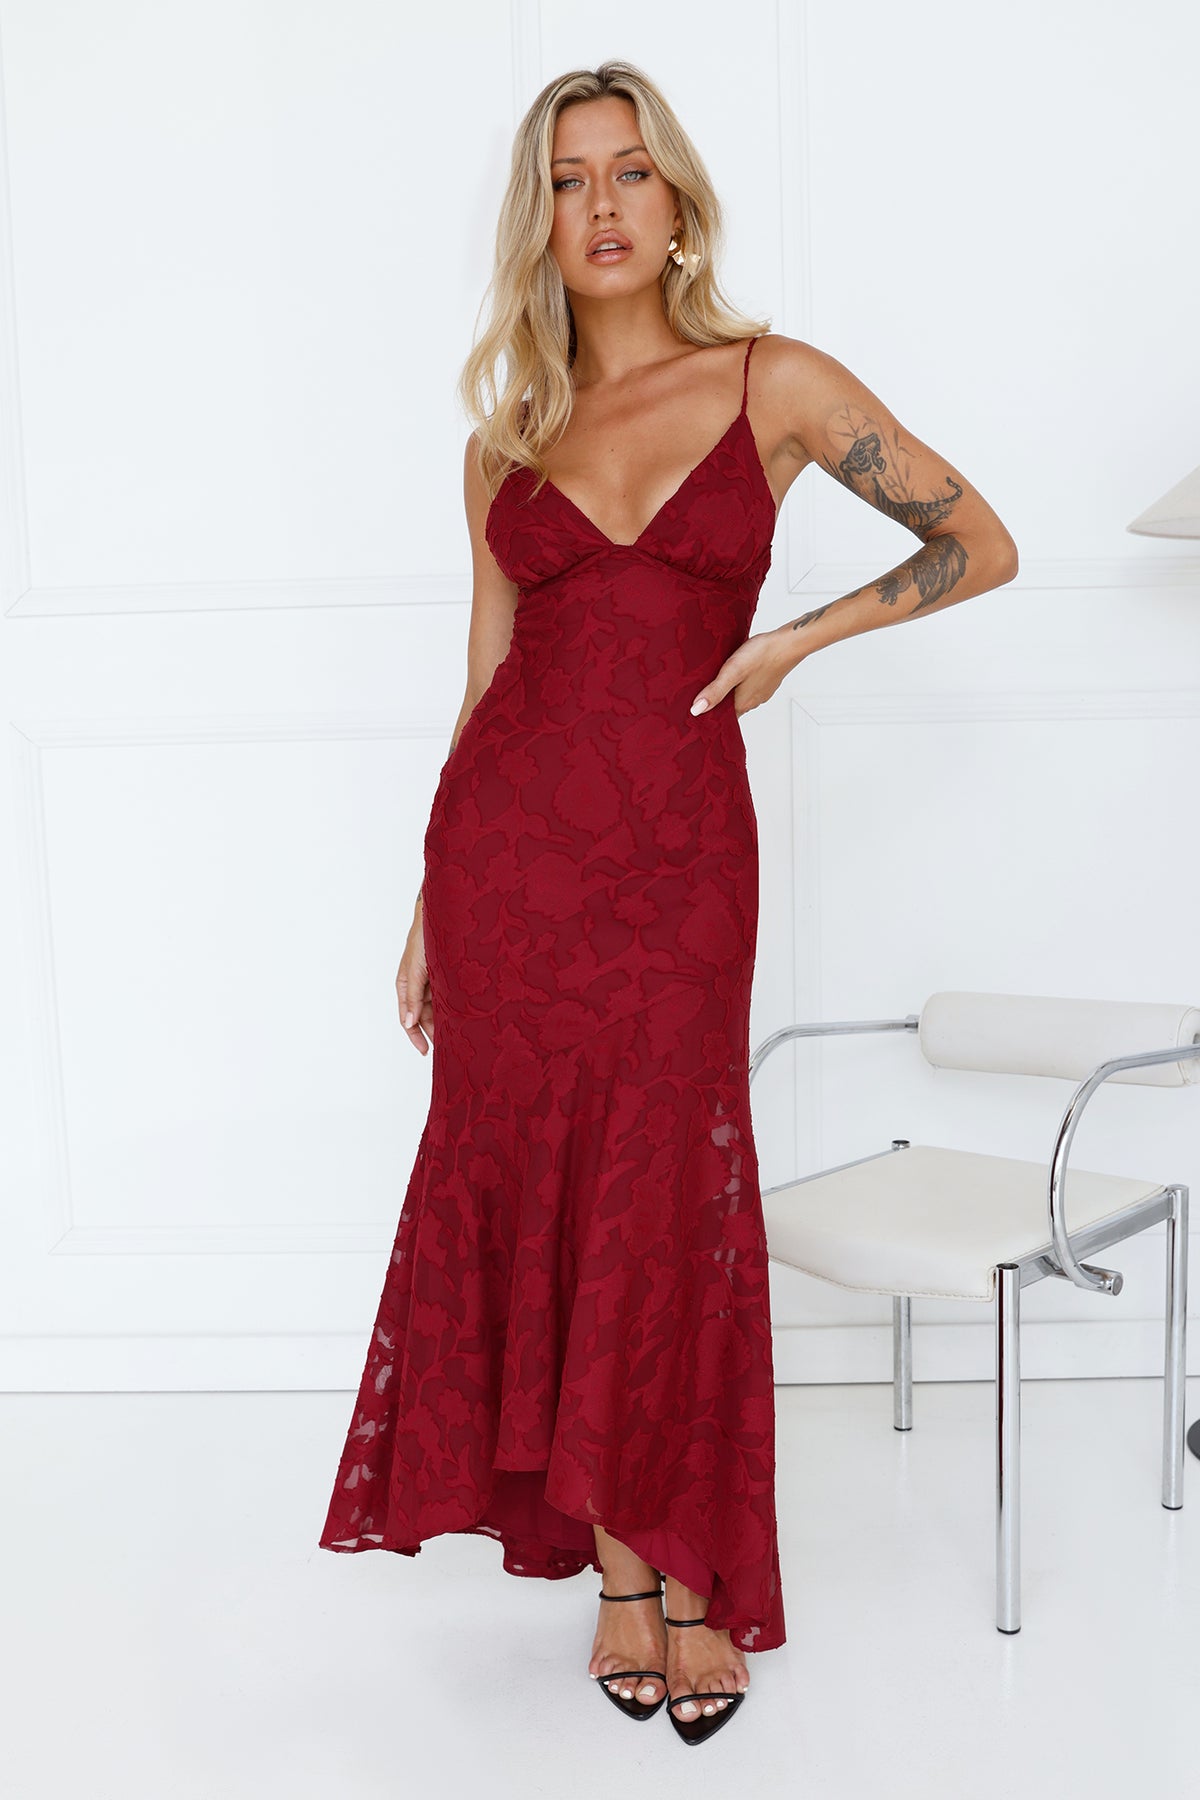 Shop Formal Dress - Events Countryside Maxi Dress Wine third image